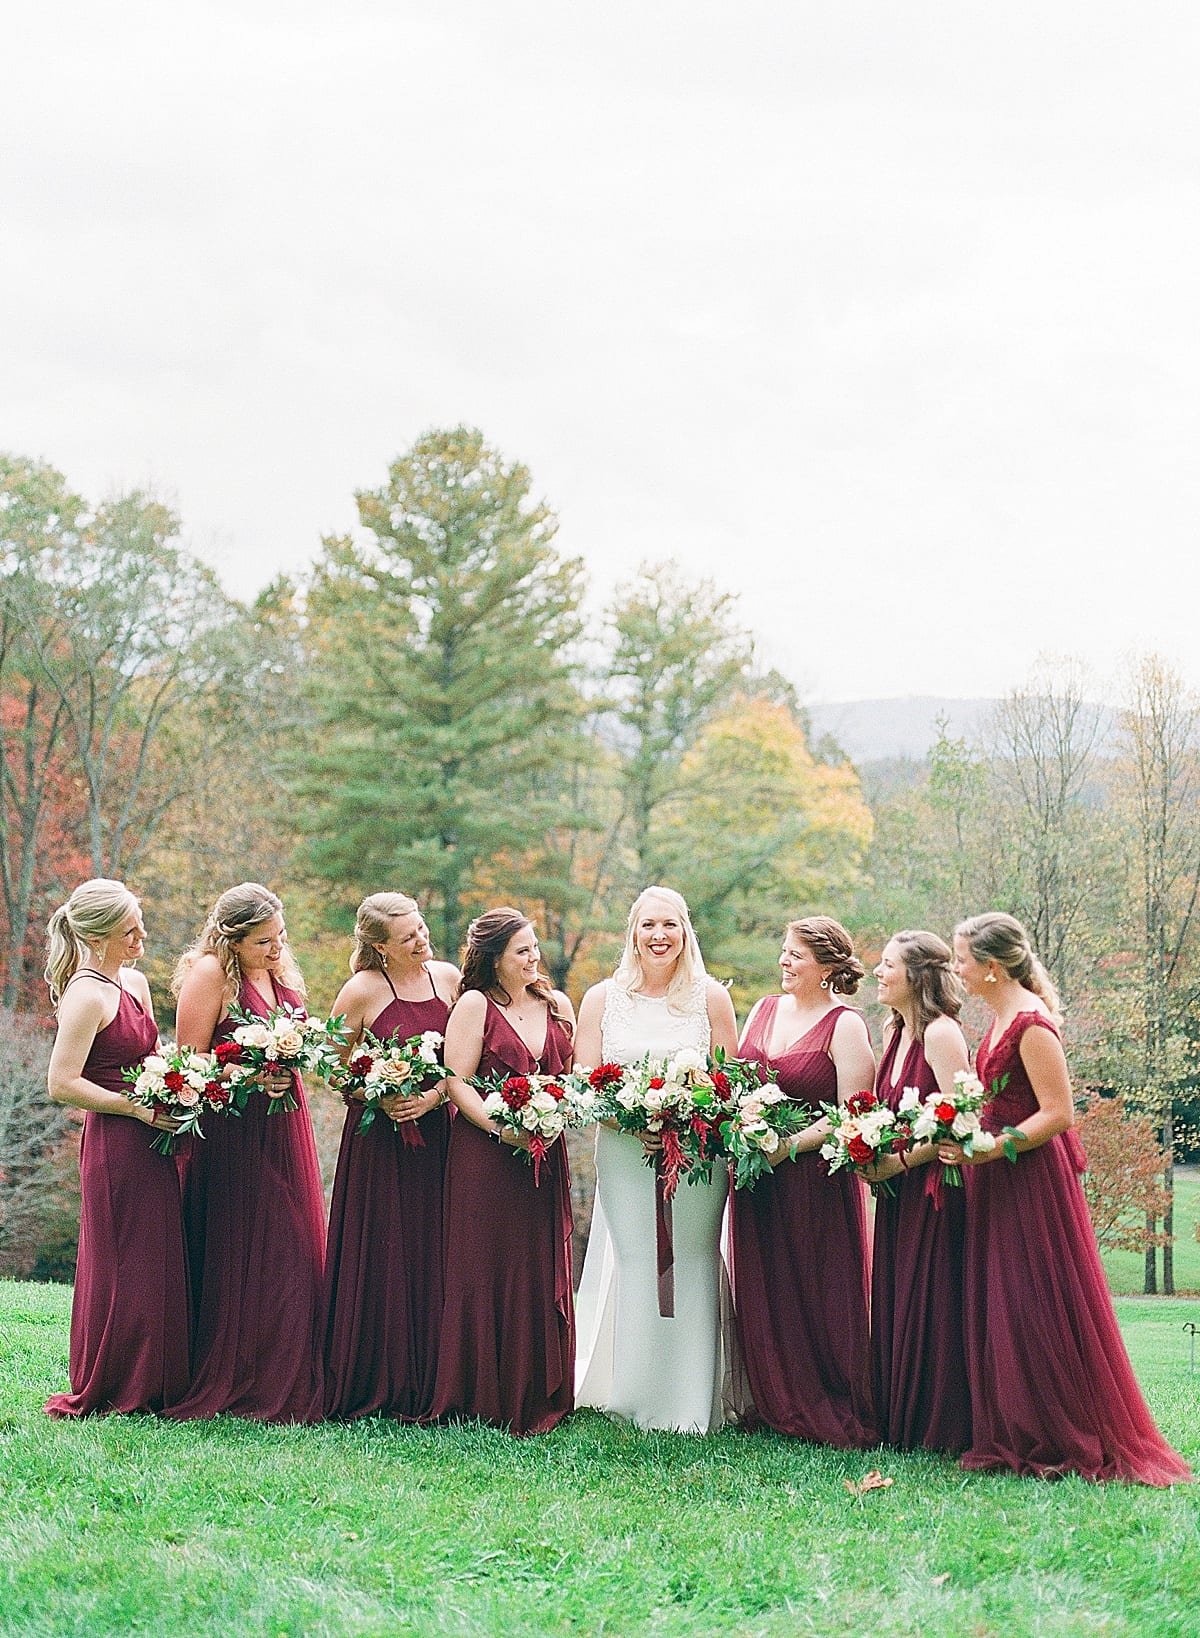 Bride Laughing With Bridesmaids Photo